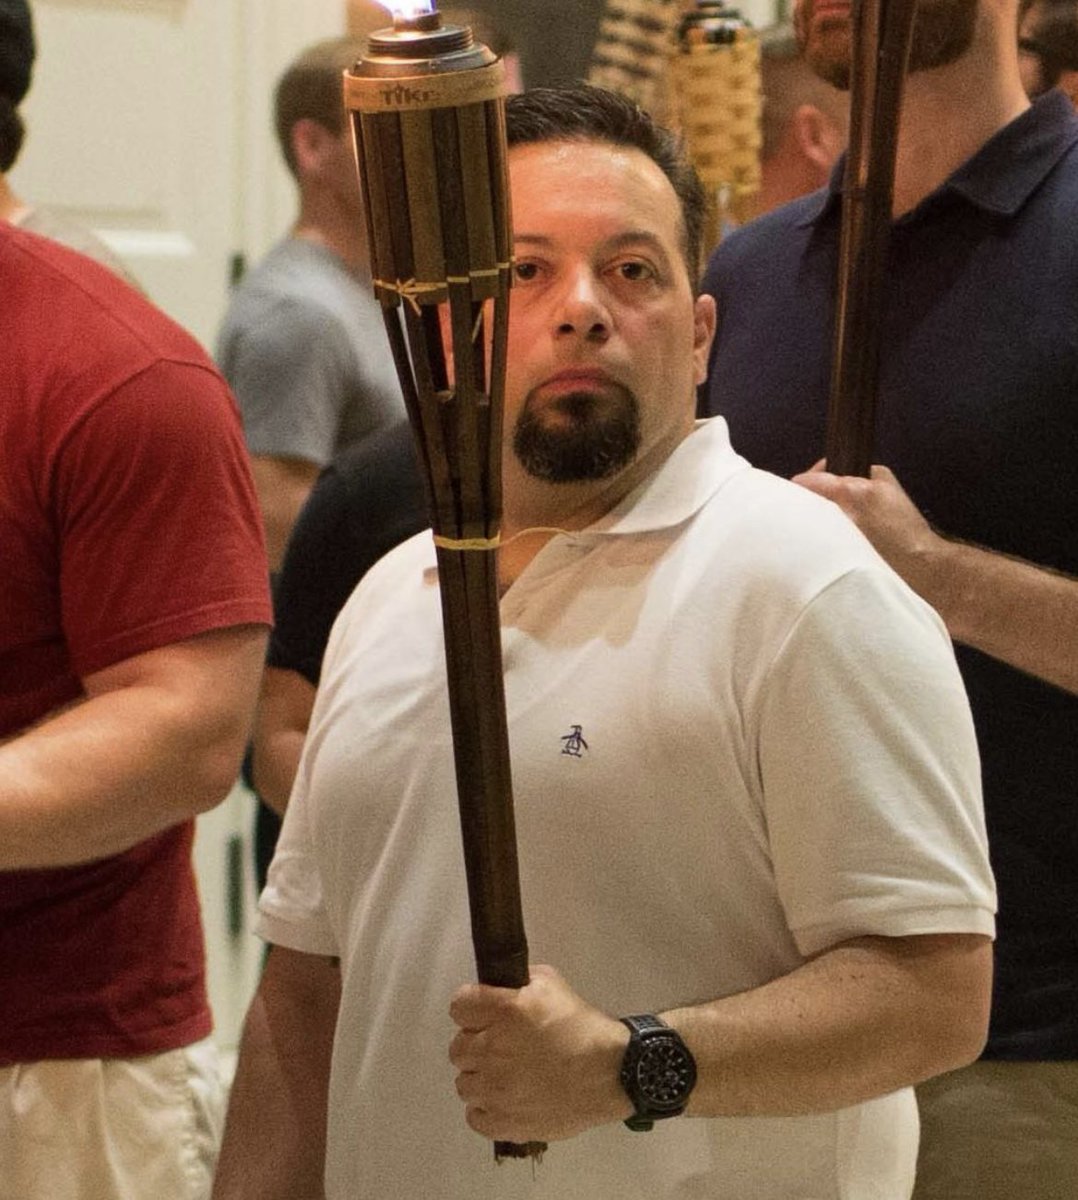 #UniteTheRight scheduled speaker #JohnnyMonoxide #JohnnyRamondettaUTR also carried a burning torch in the march @UVA on 8/11/17. Did this #IdentityEvropa member intend to intimidate antiracists? #UnmaskUTR